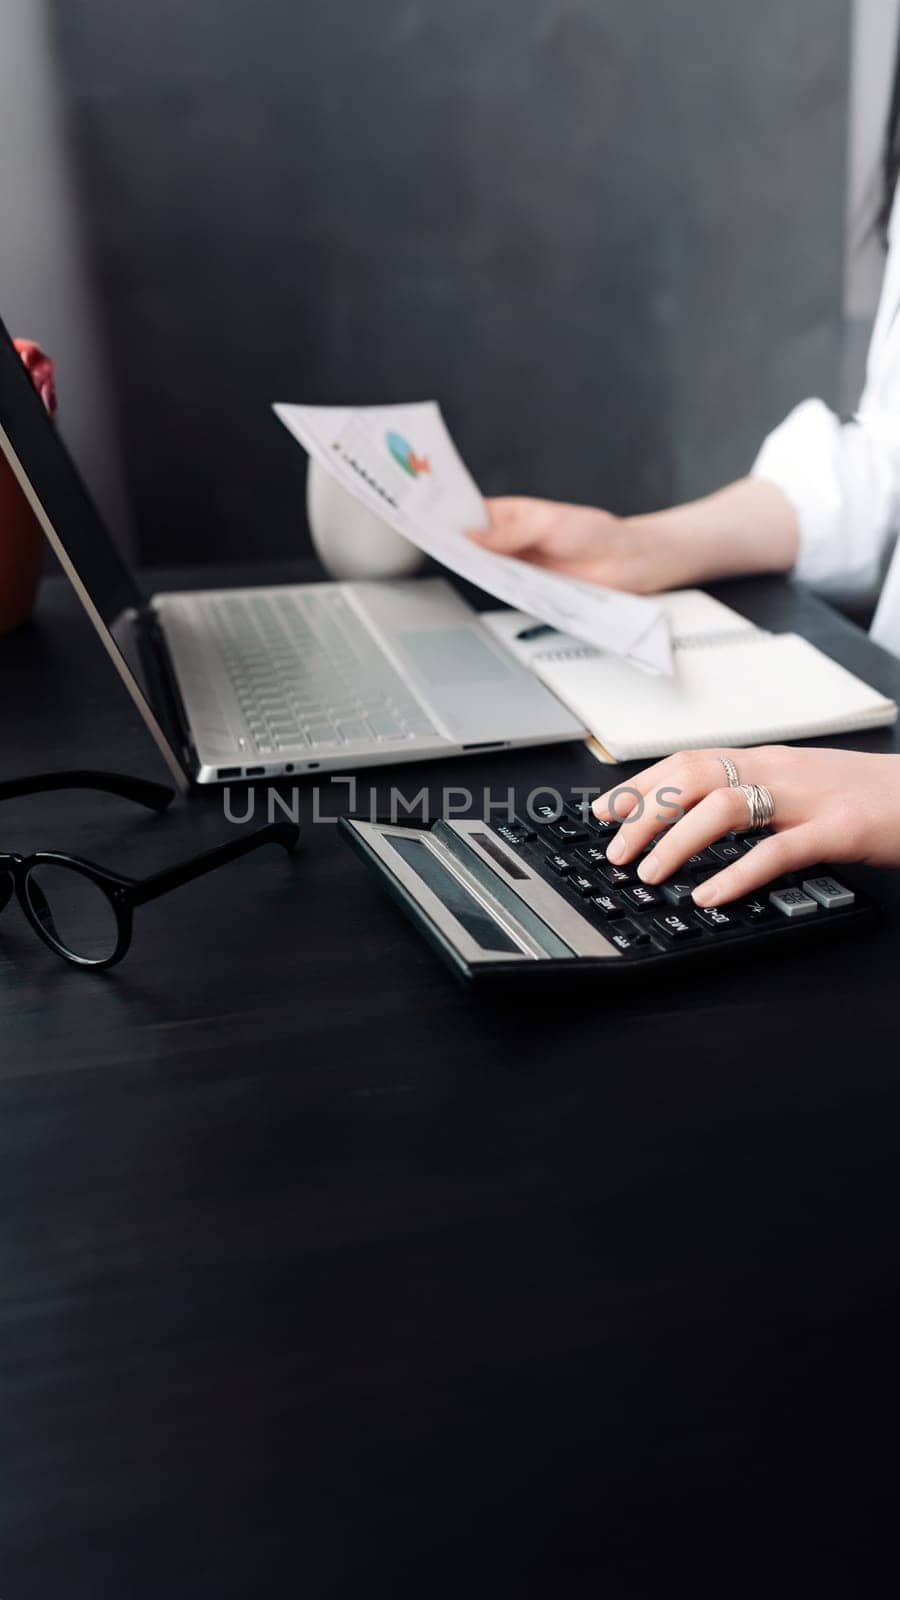 Accountant's Precision. Businesswoman Analyzing Financial Budget, Calculating Finance Report with Calculator, Close-Up Document. Strategic Finance Management: Woman Calculating Budget